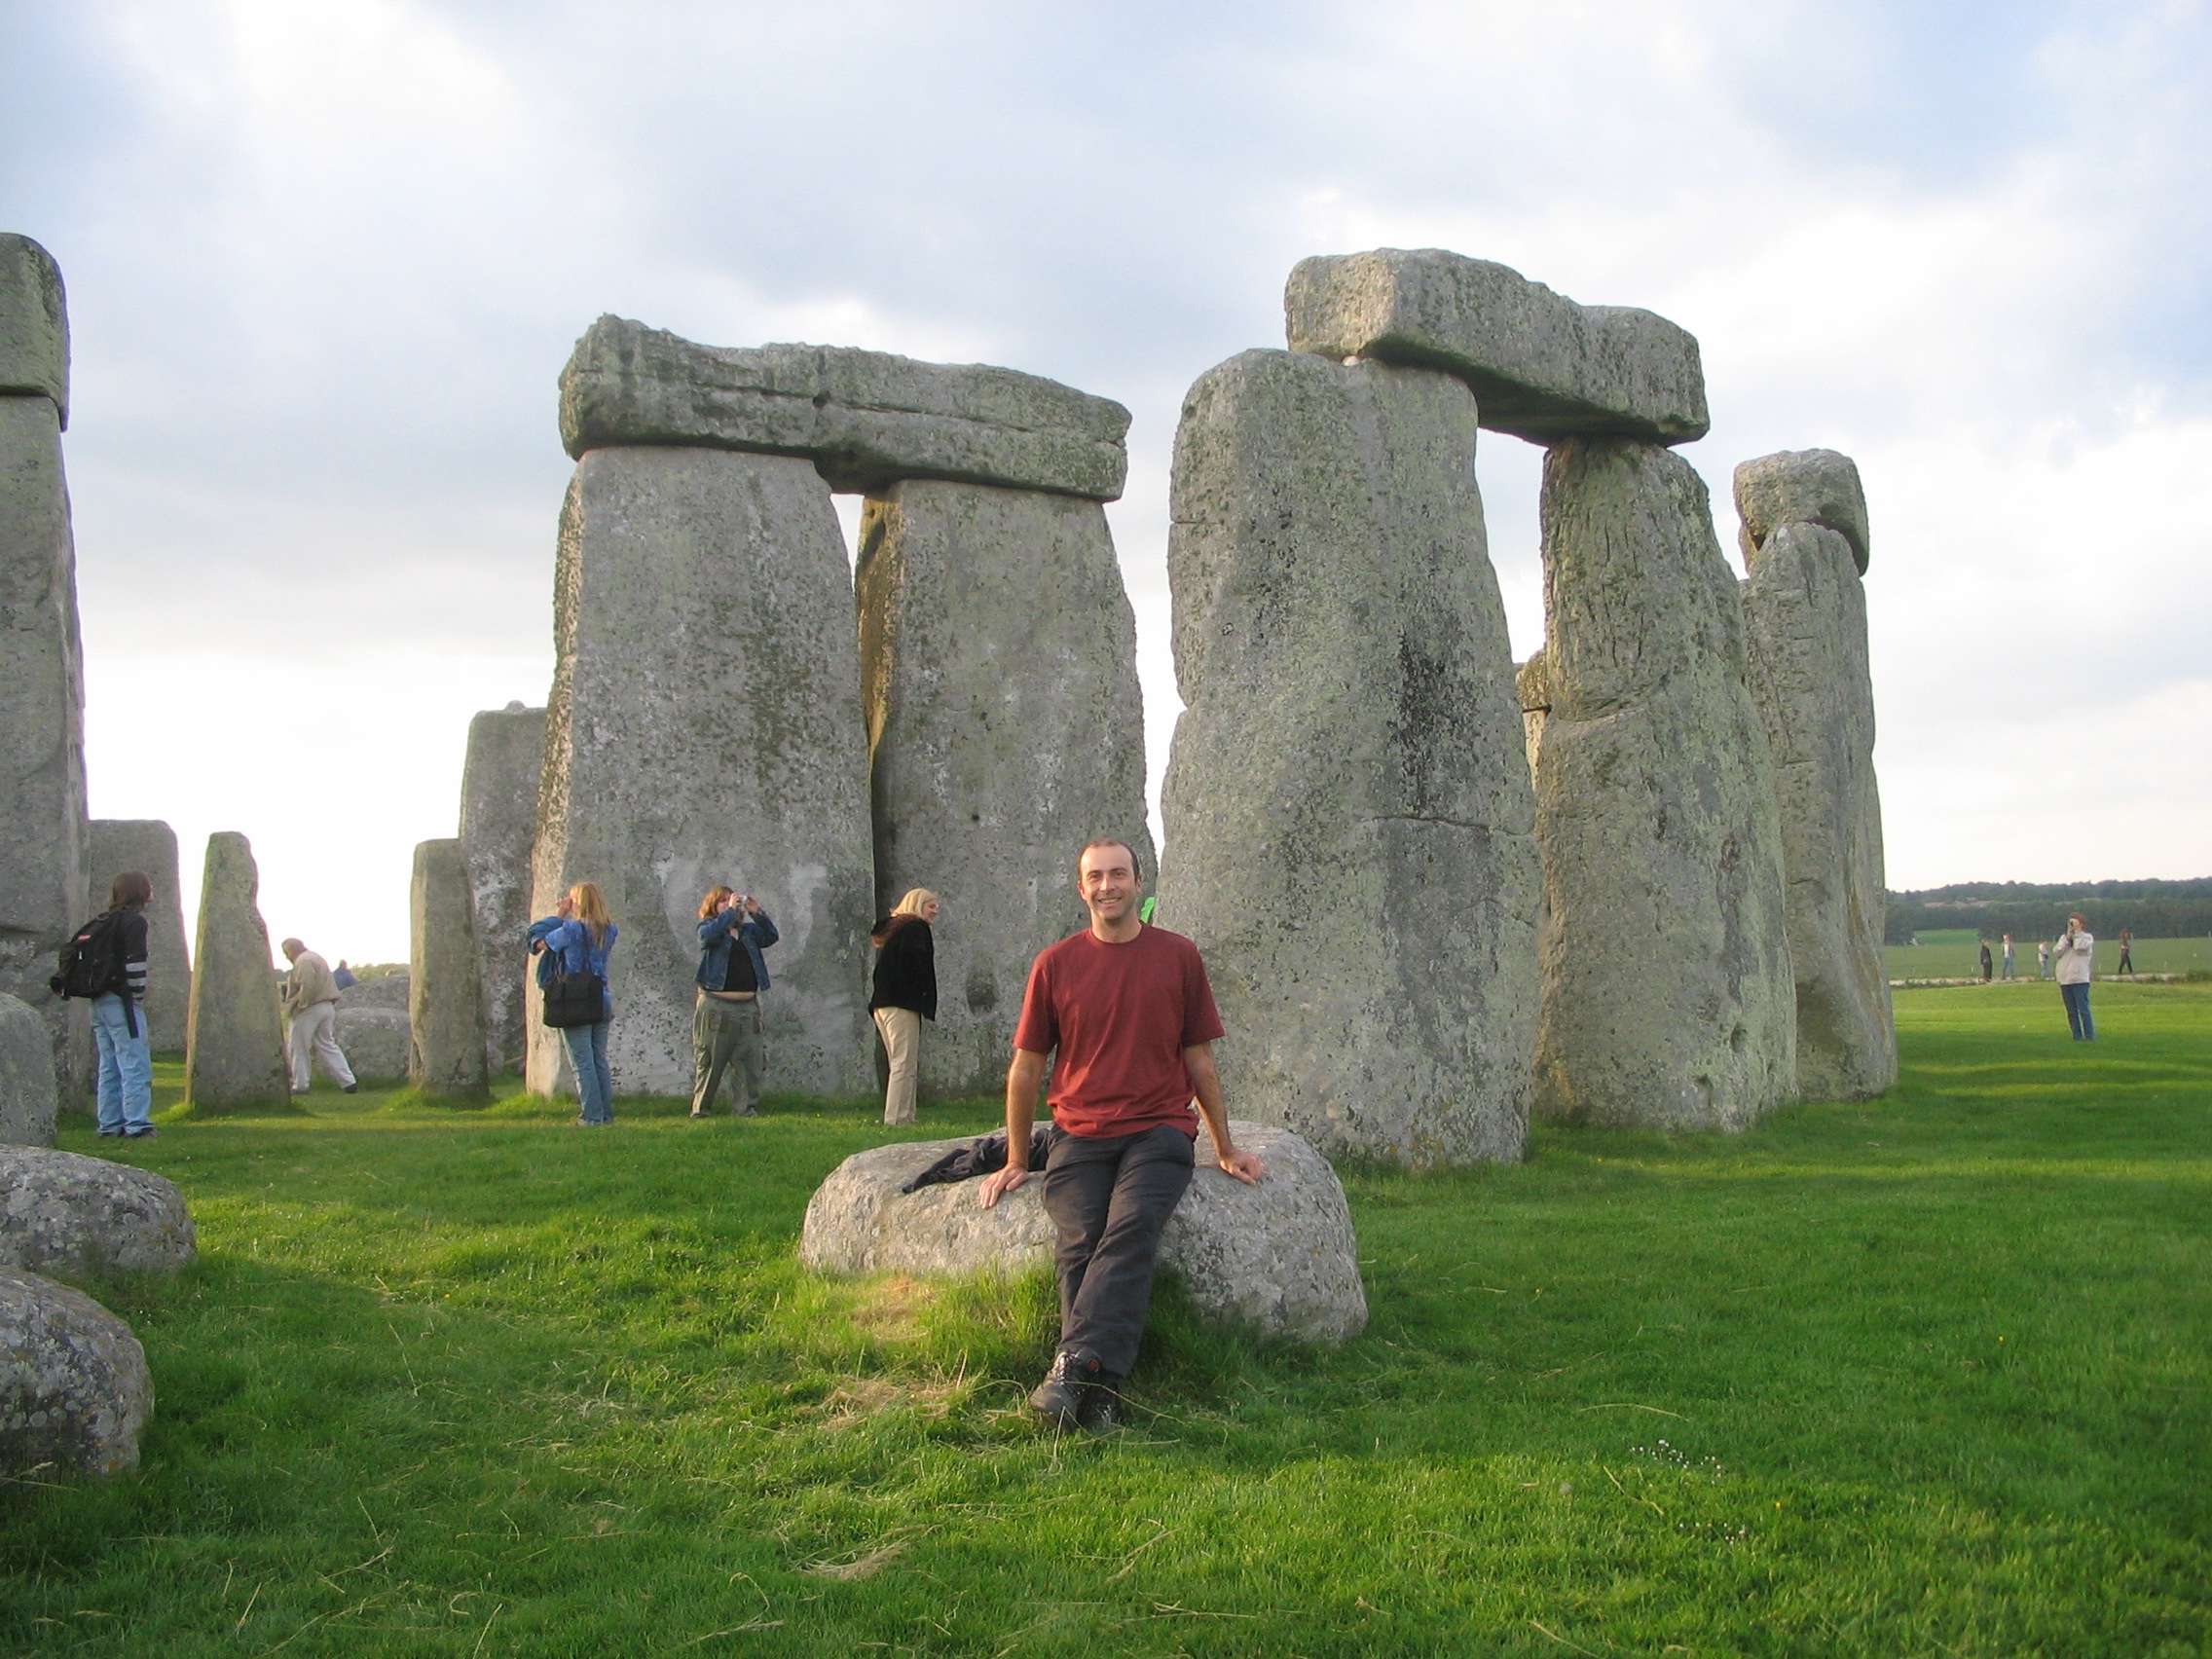 a man sitting on a rock in front of a stone structure with Stonehenge in the background